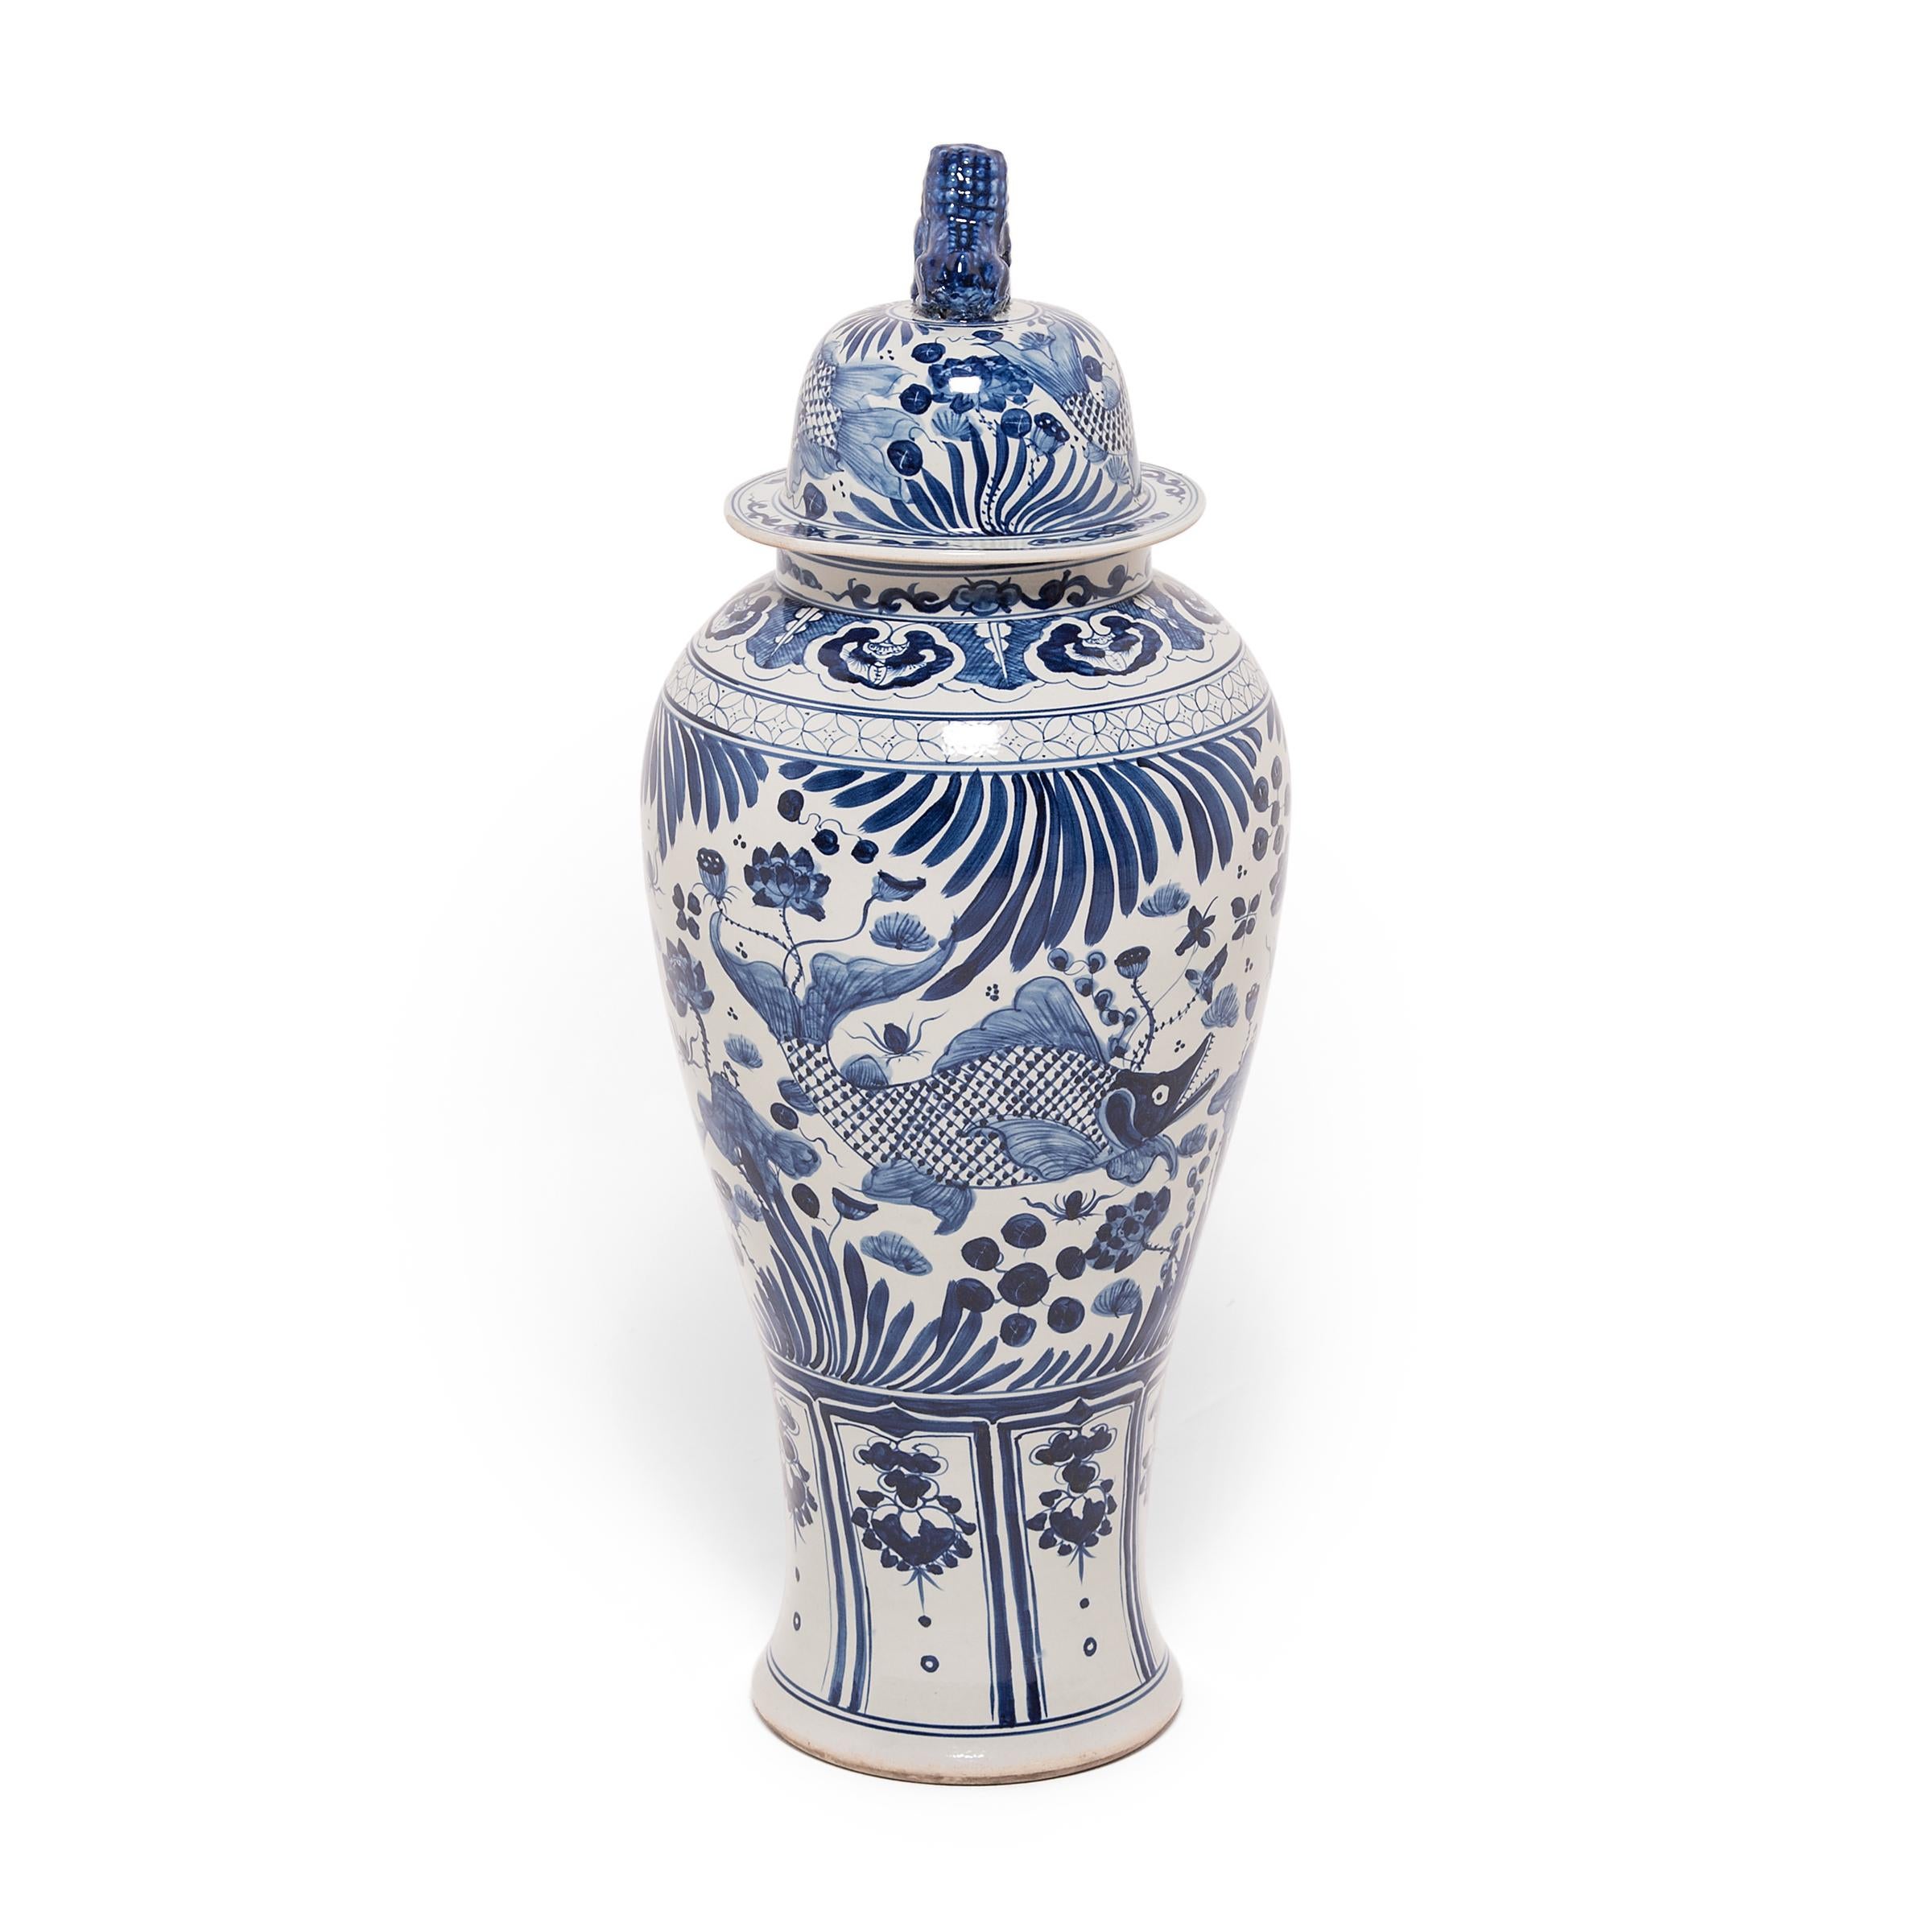 Glazed Pair of Chinese Monumental Blue and White Fish Jars with Shizi Tops